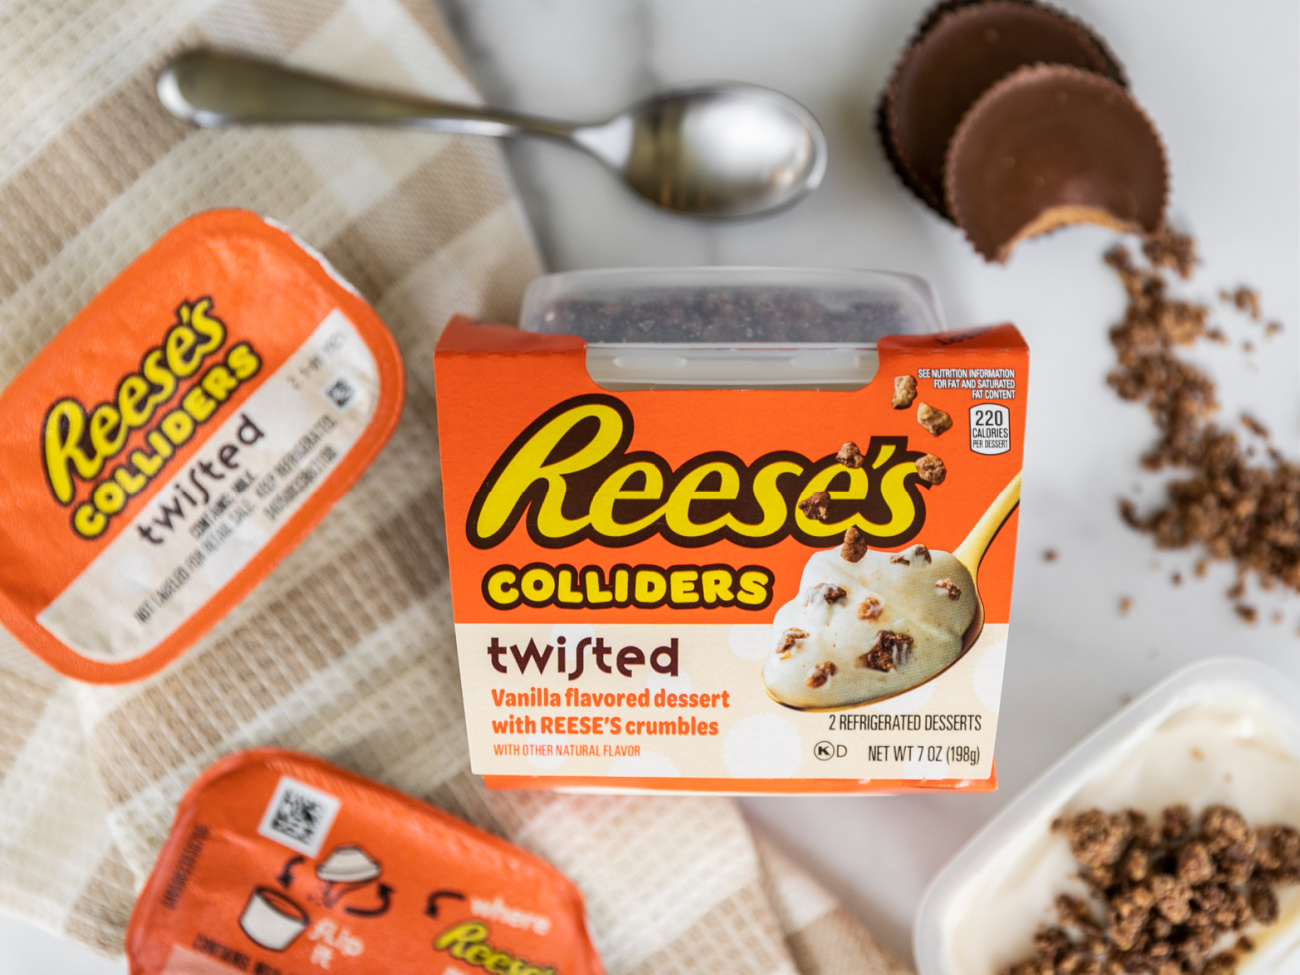 Get Colliders Refrigerated Desserts For Just 74¢ At Kroger